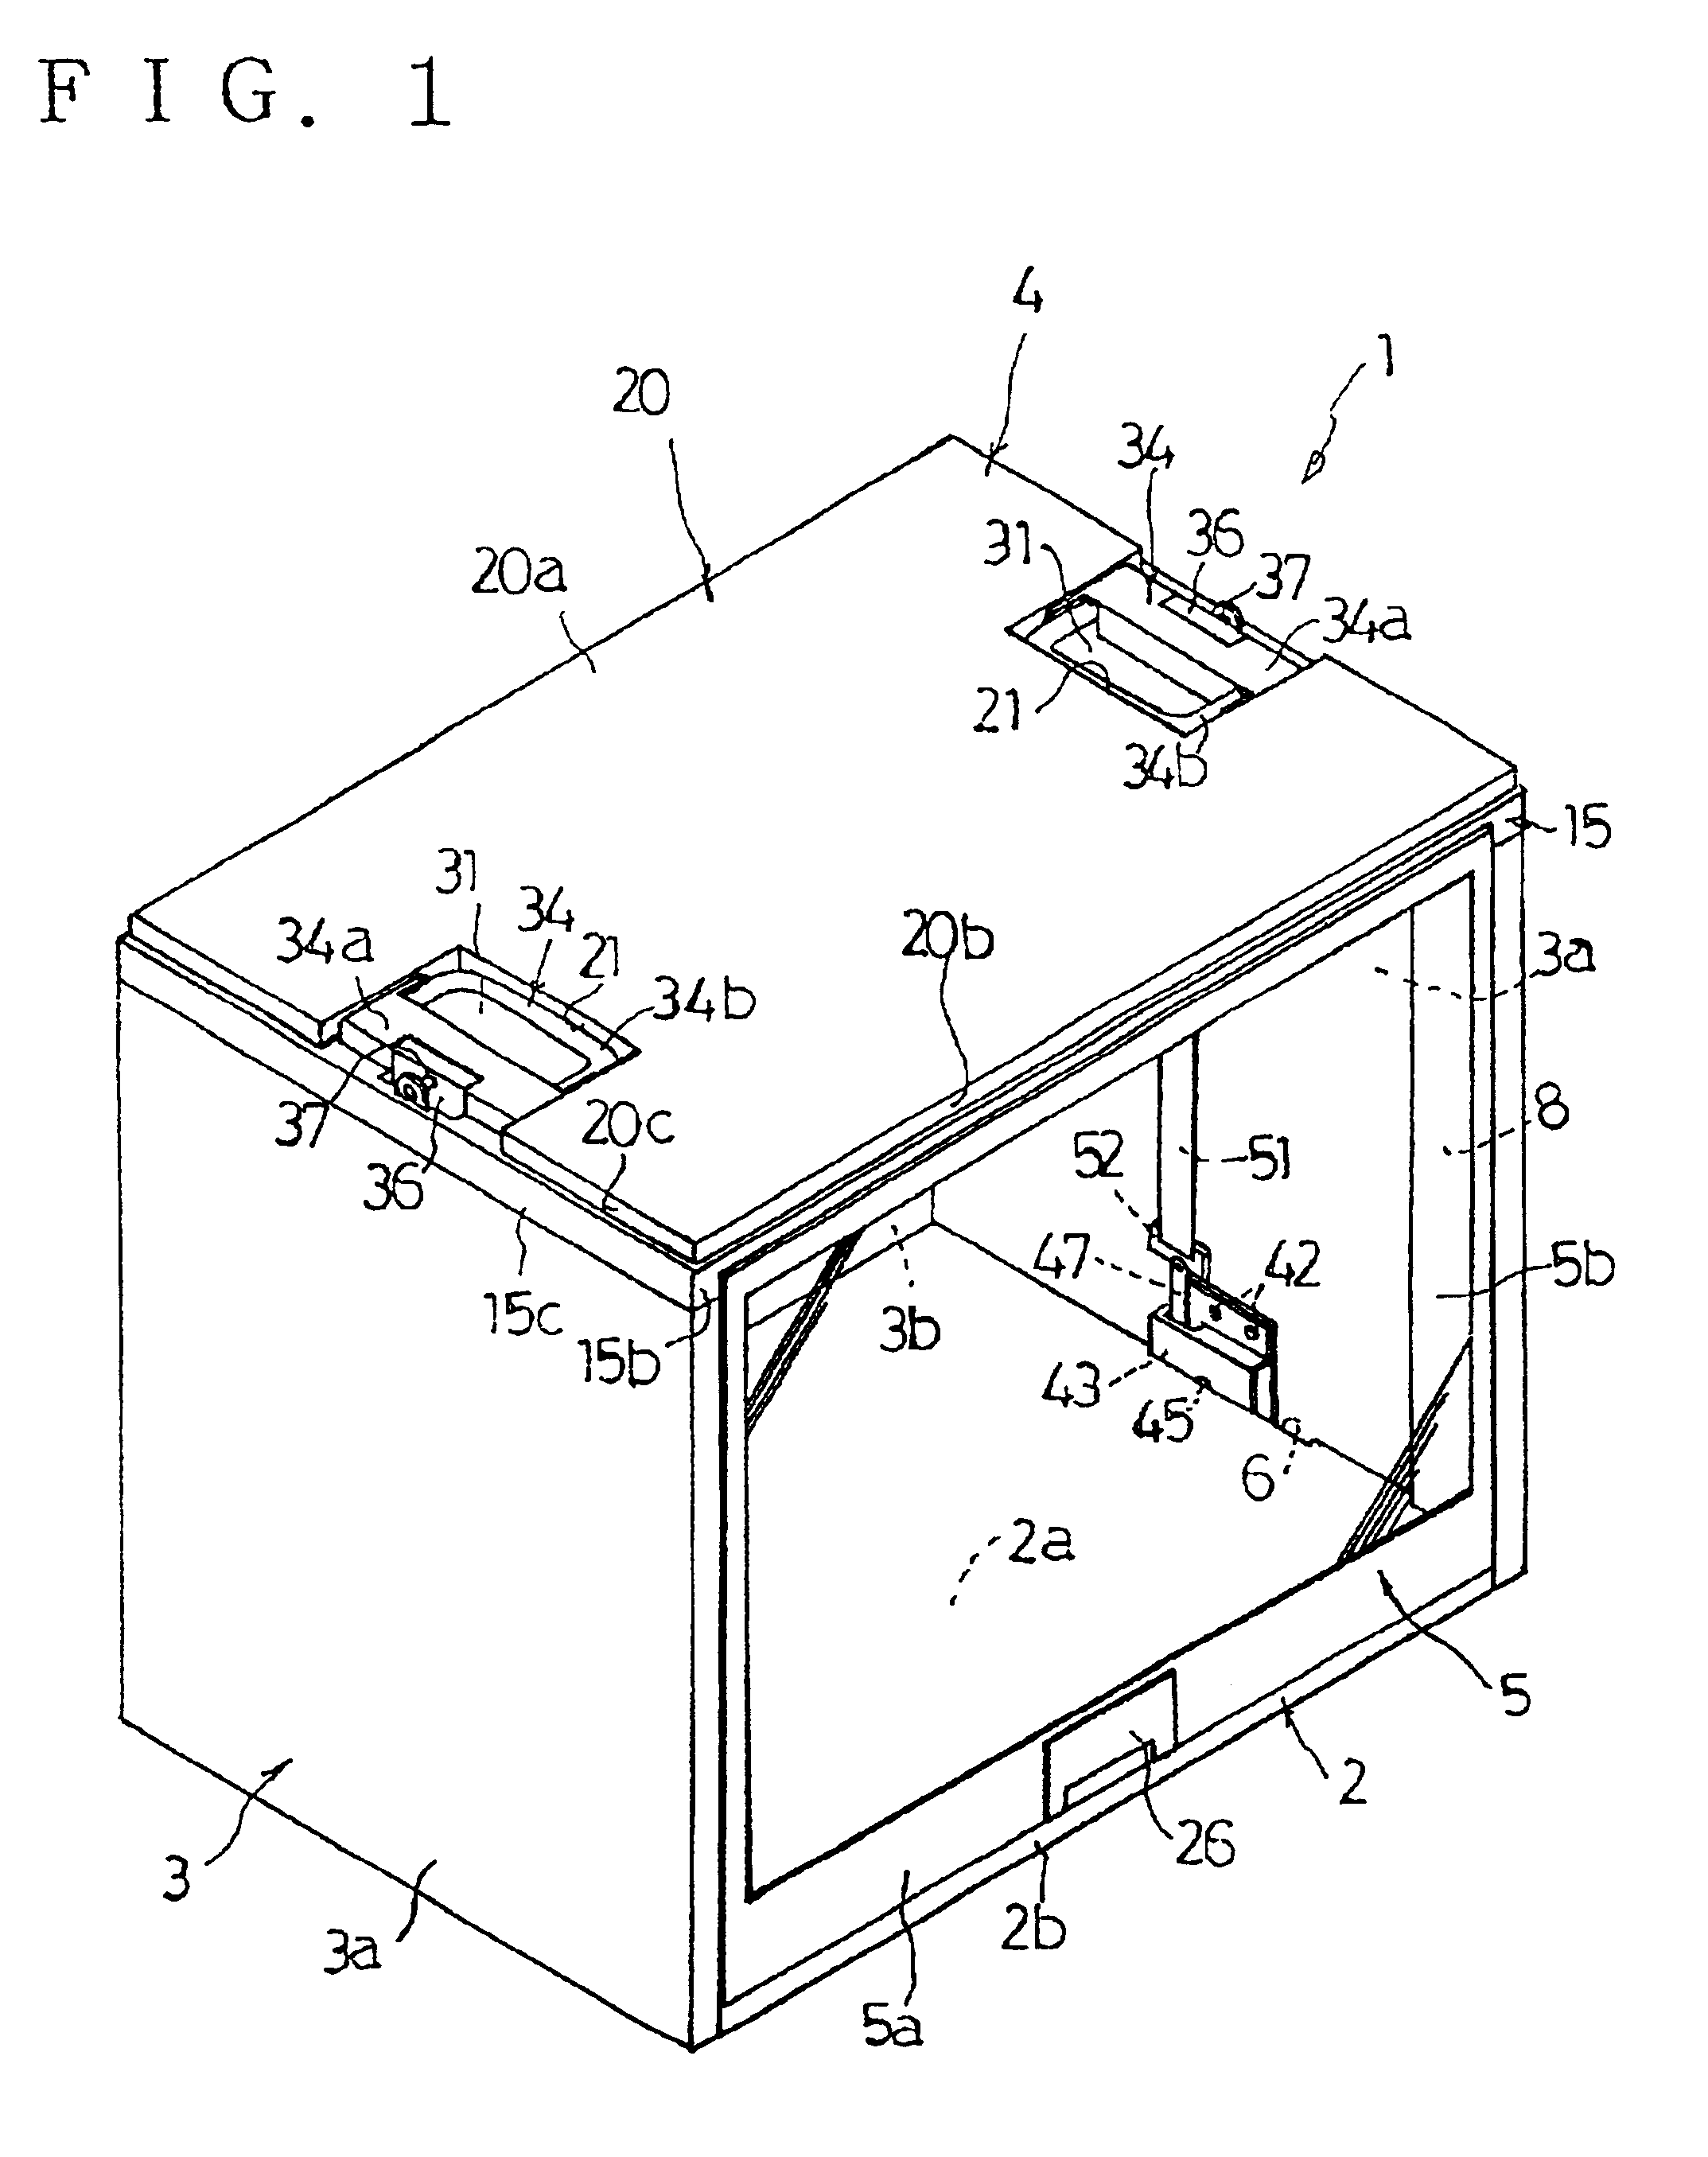 Connection structure of storage compartment